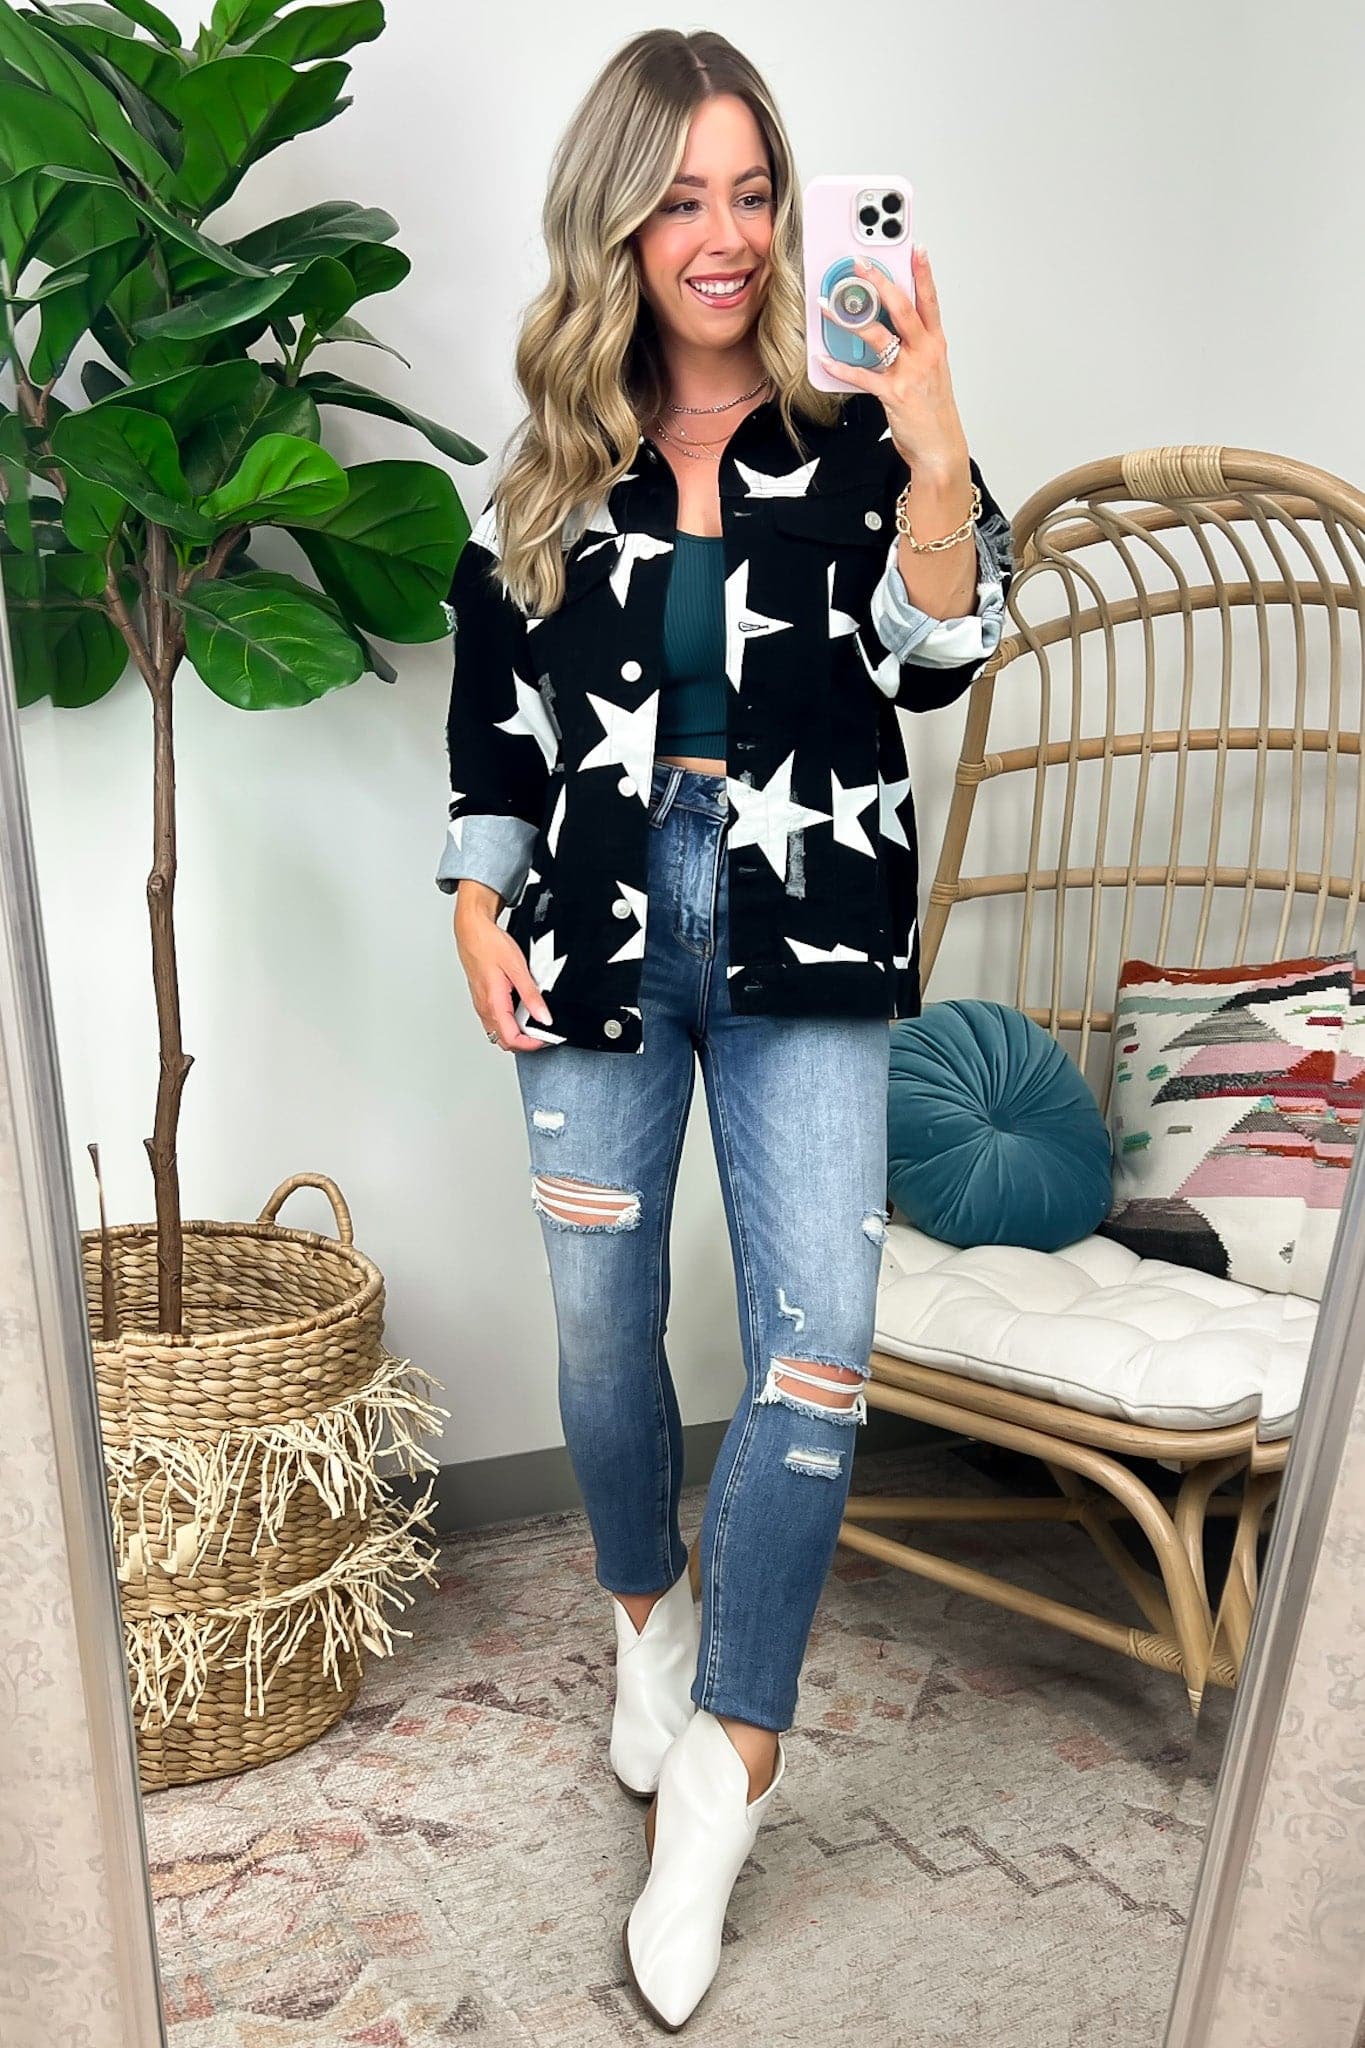  Twinkle Twinkle Star Print Distressed Denim Jacket - FINAL SALE - Madison and Mallory